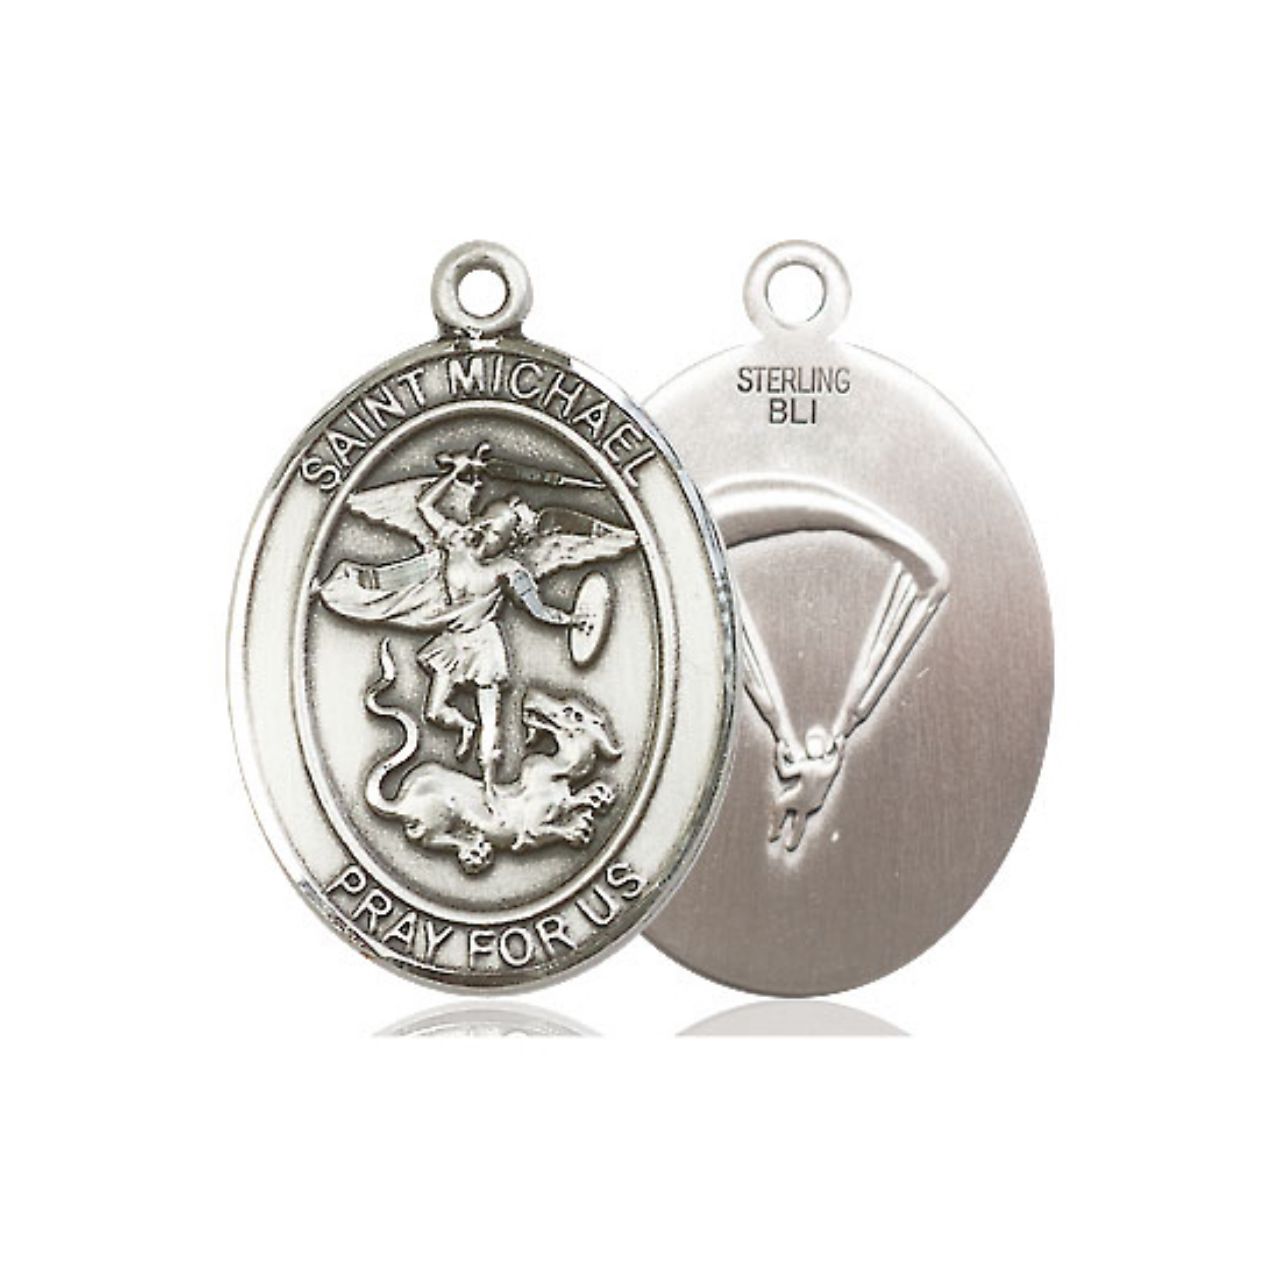 St. Michael Paratrooper Medal - Sterling Silver Oval Pendant (3 Sizes)